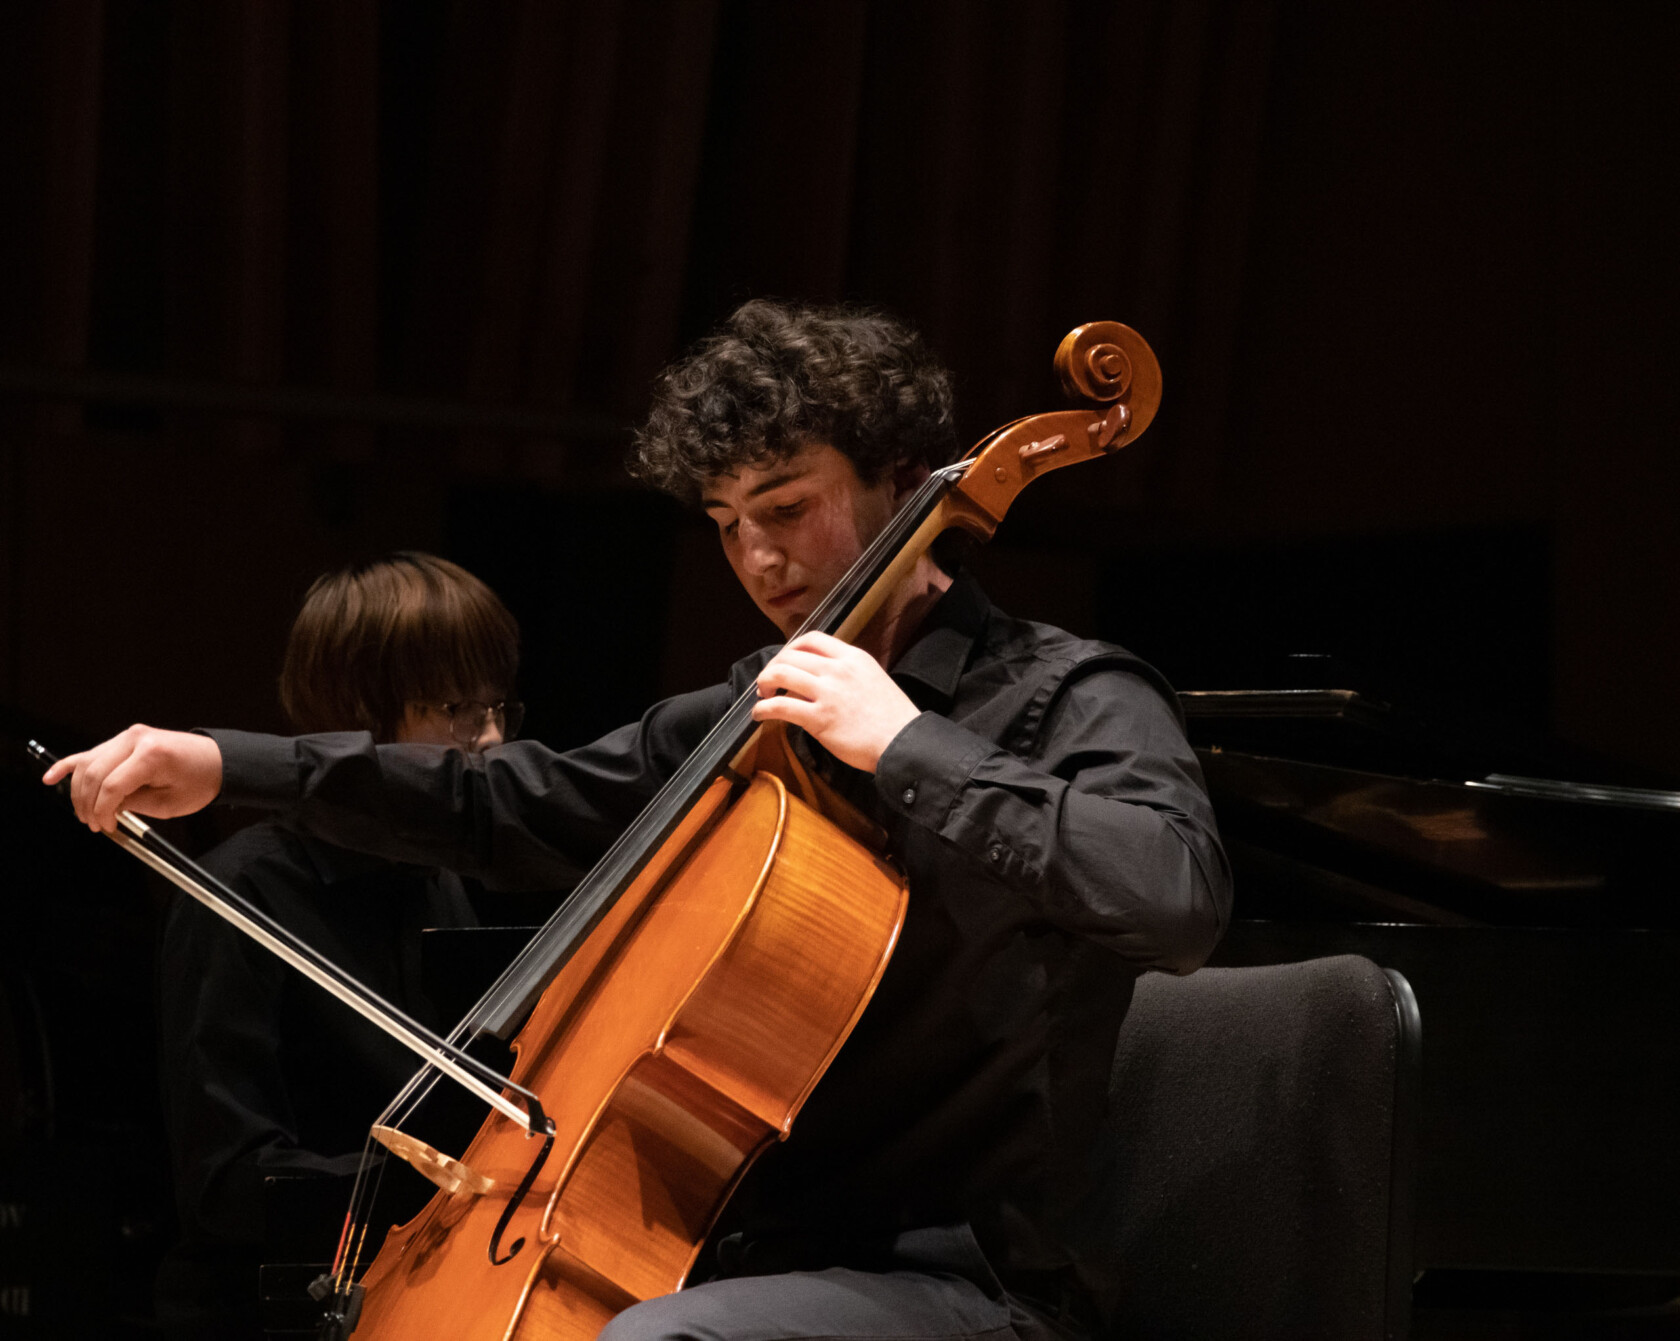 A cellist performing.